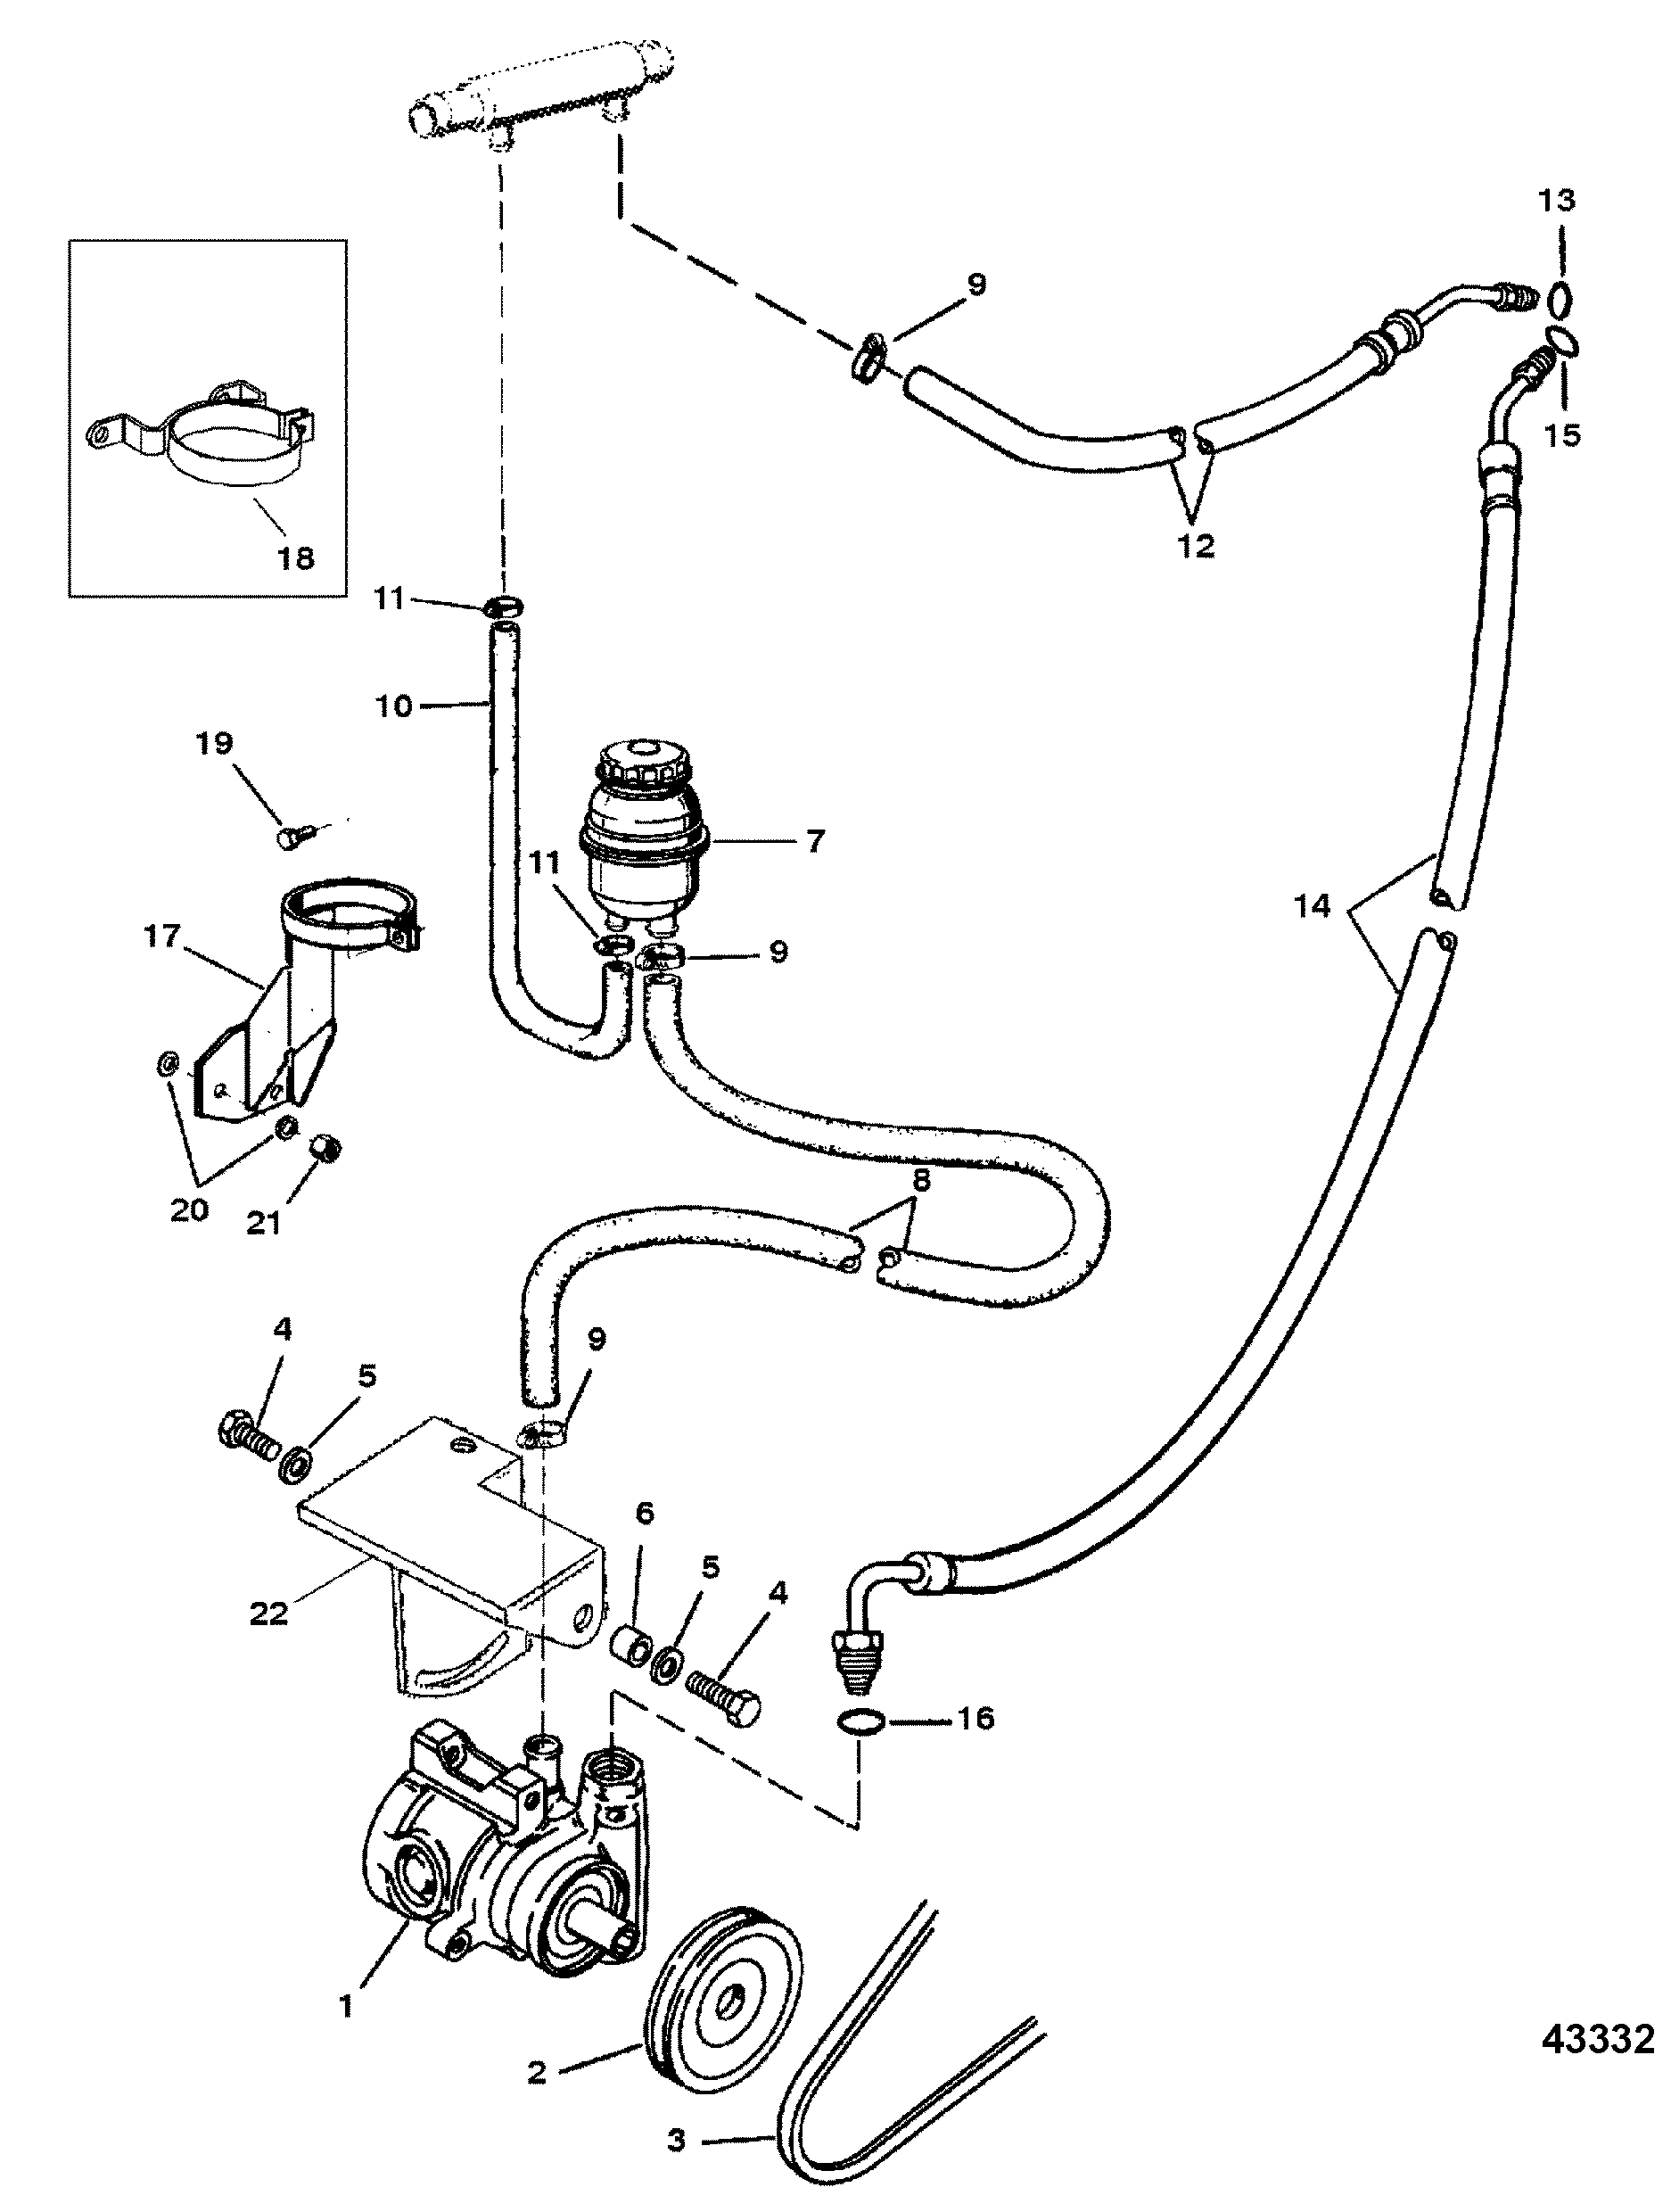 Power Steering Components(Stern Drive)